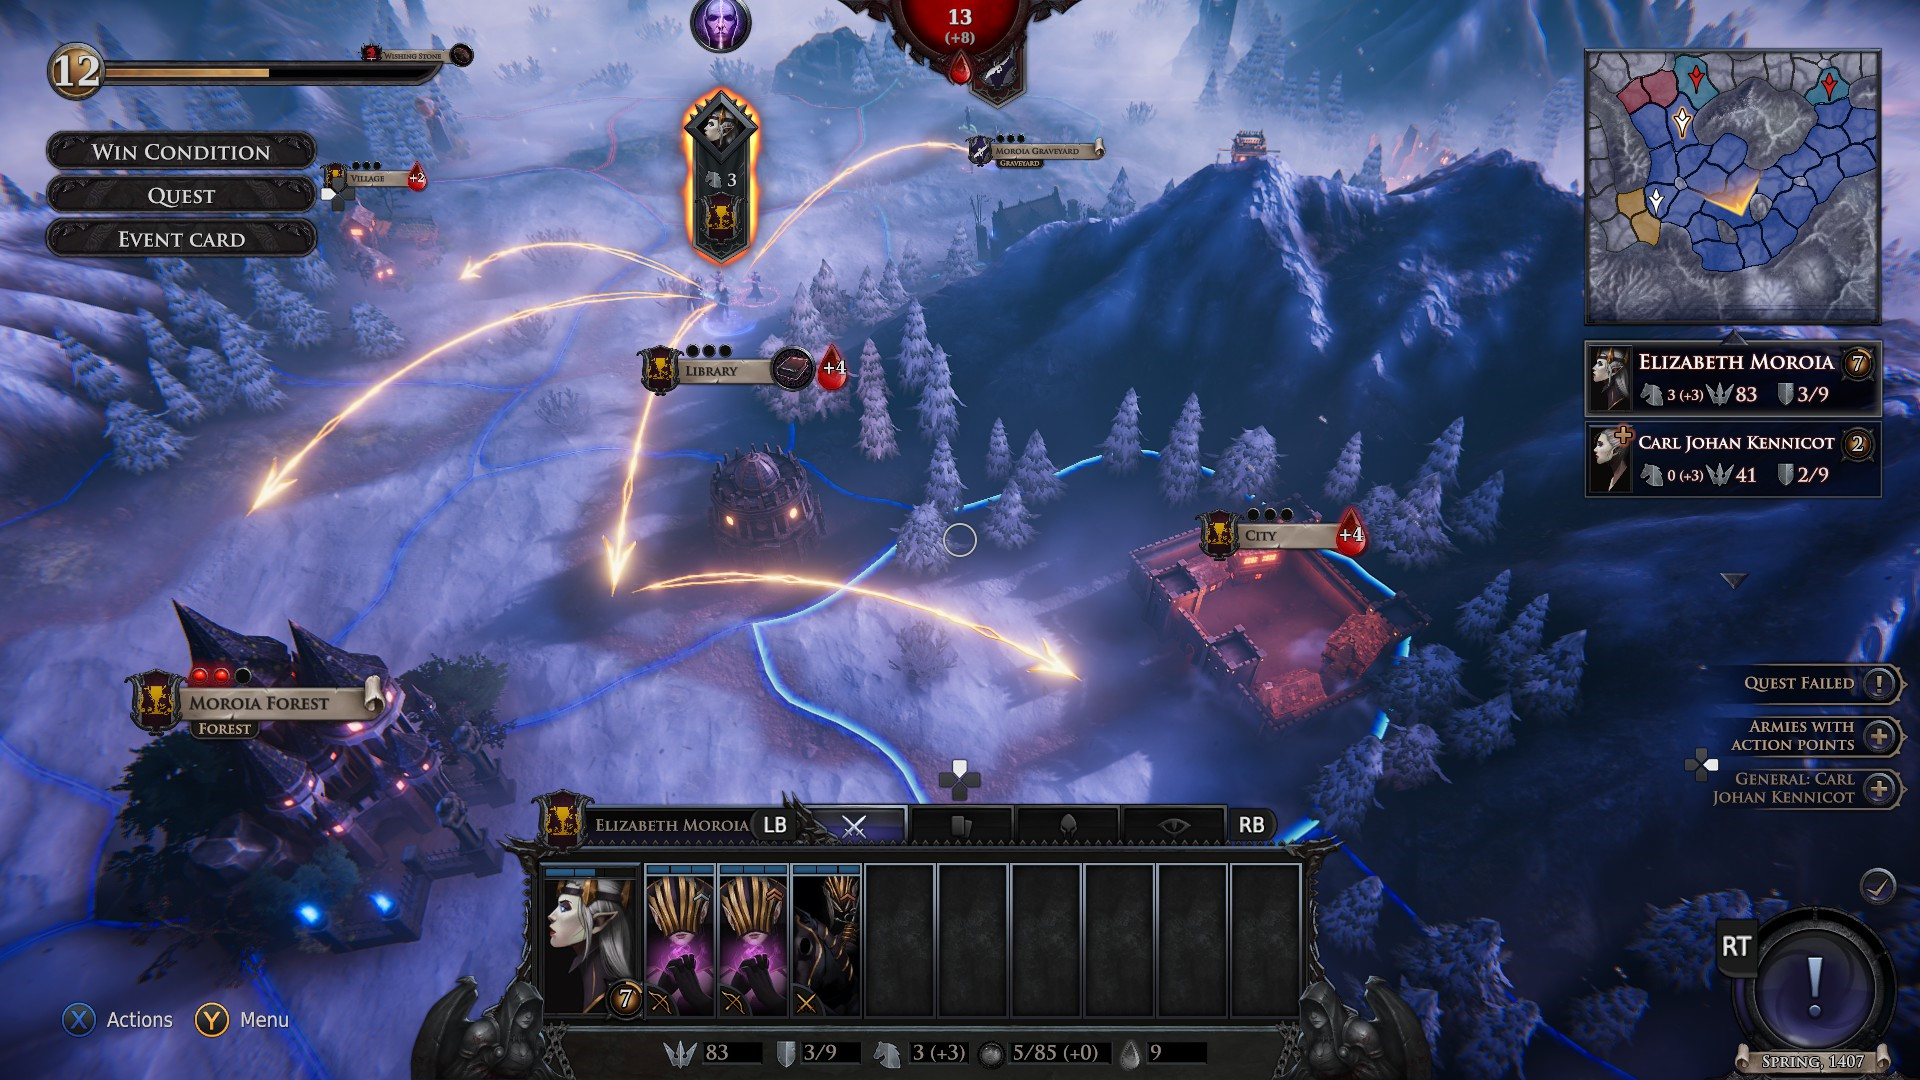 Immortal Realms: Vampire Wars Review (Switch)